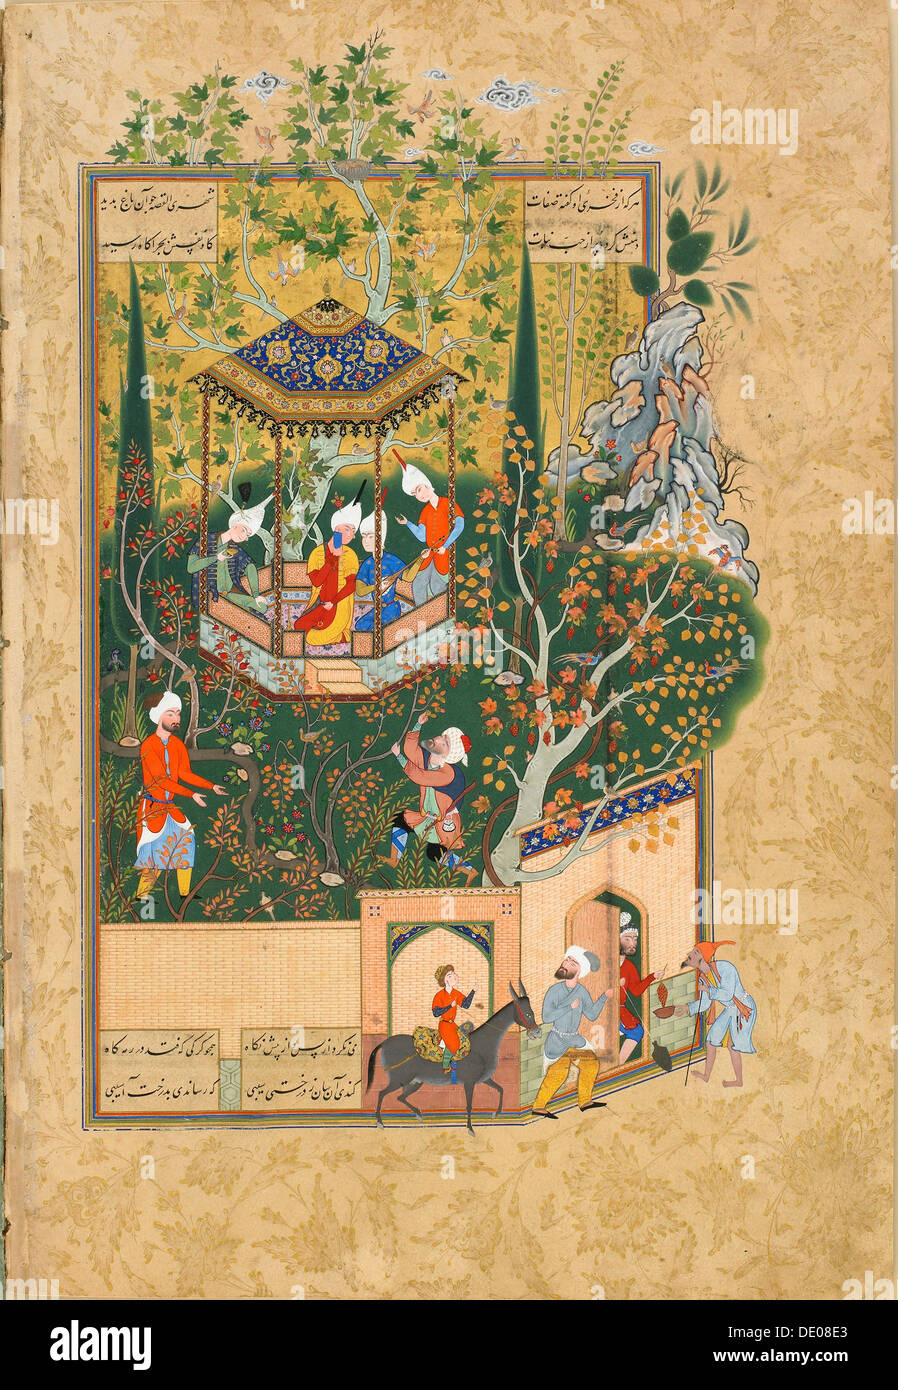 Folio from Haft Awrang (Seven Thrones), by Jami, 1550s. Artist: Unknown Stock Photo